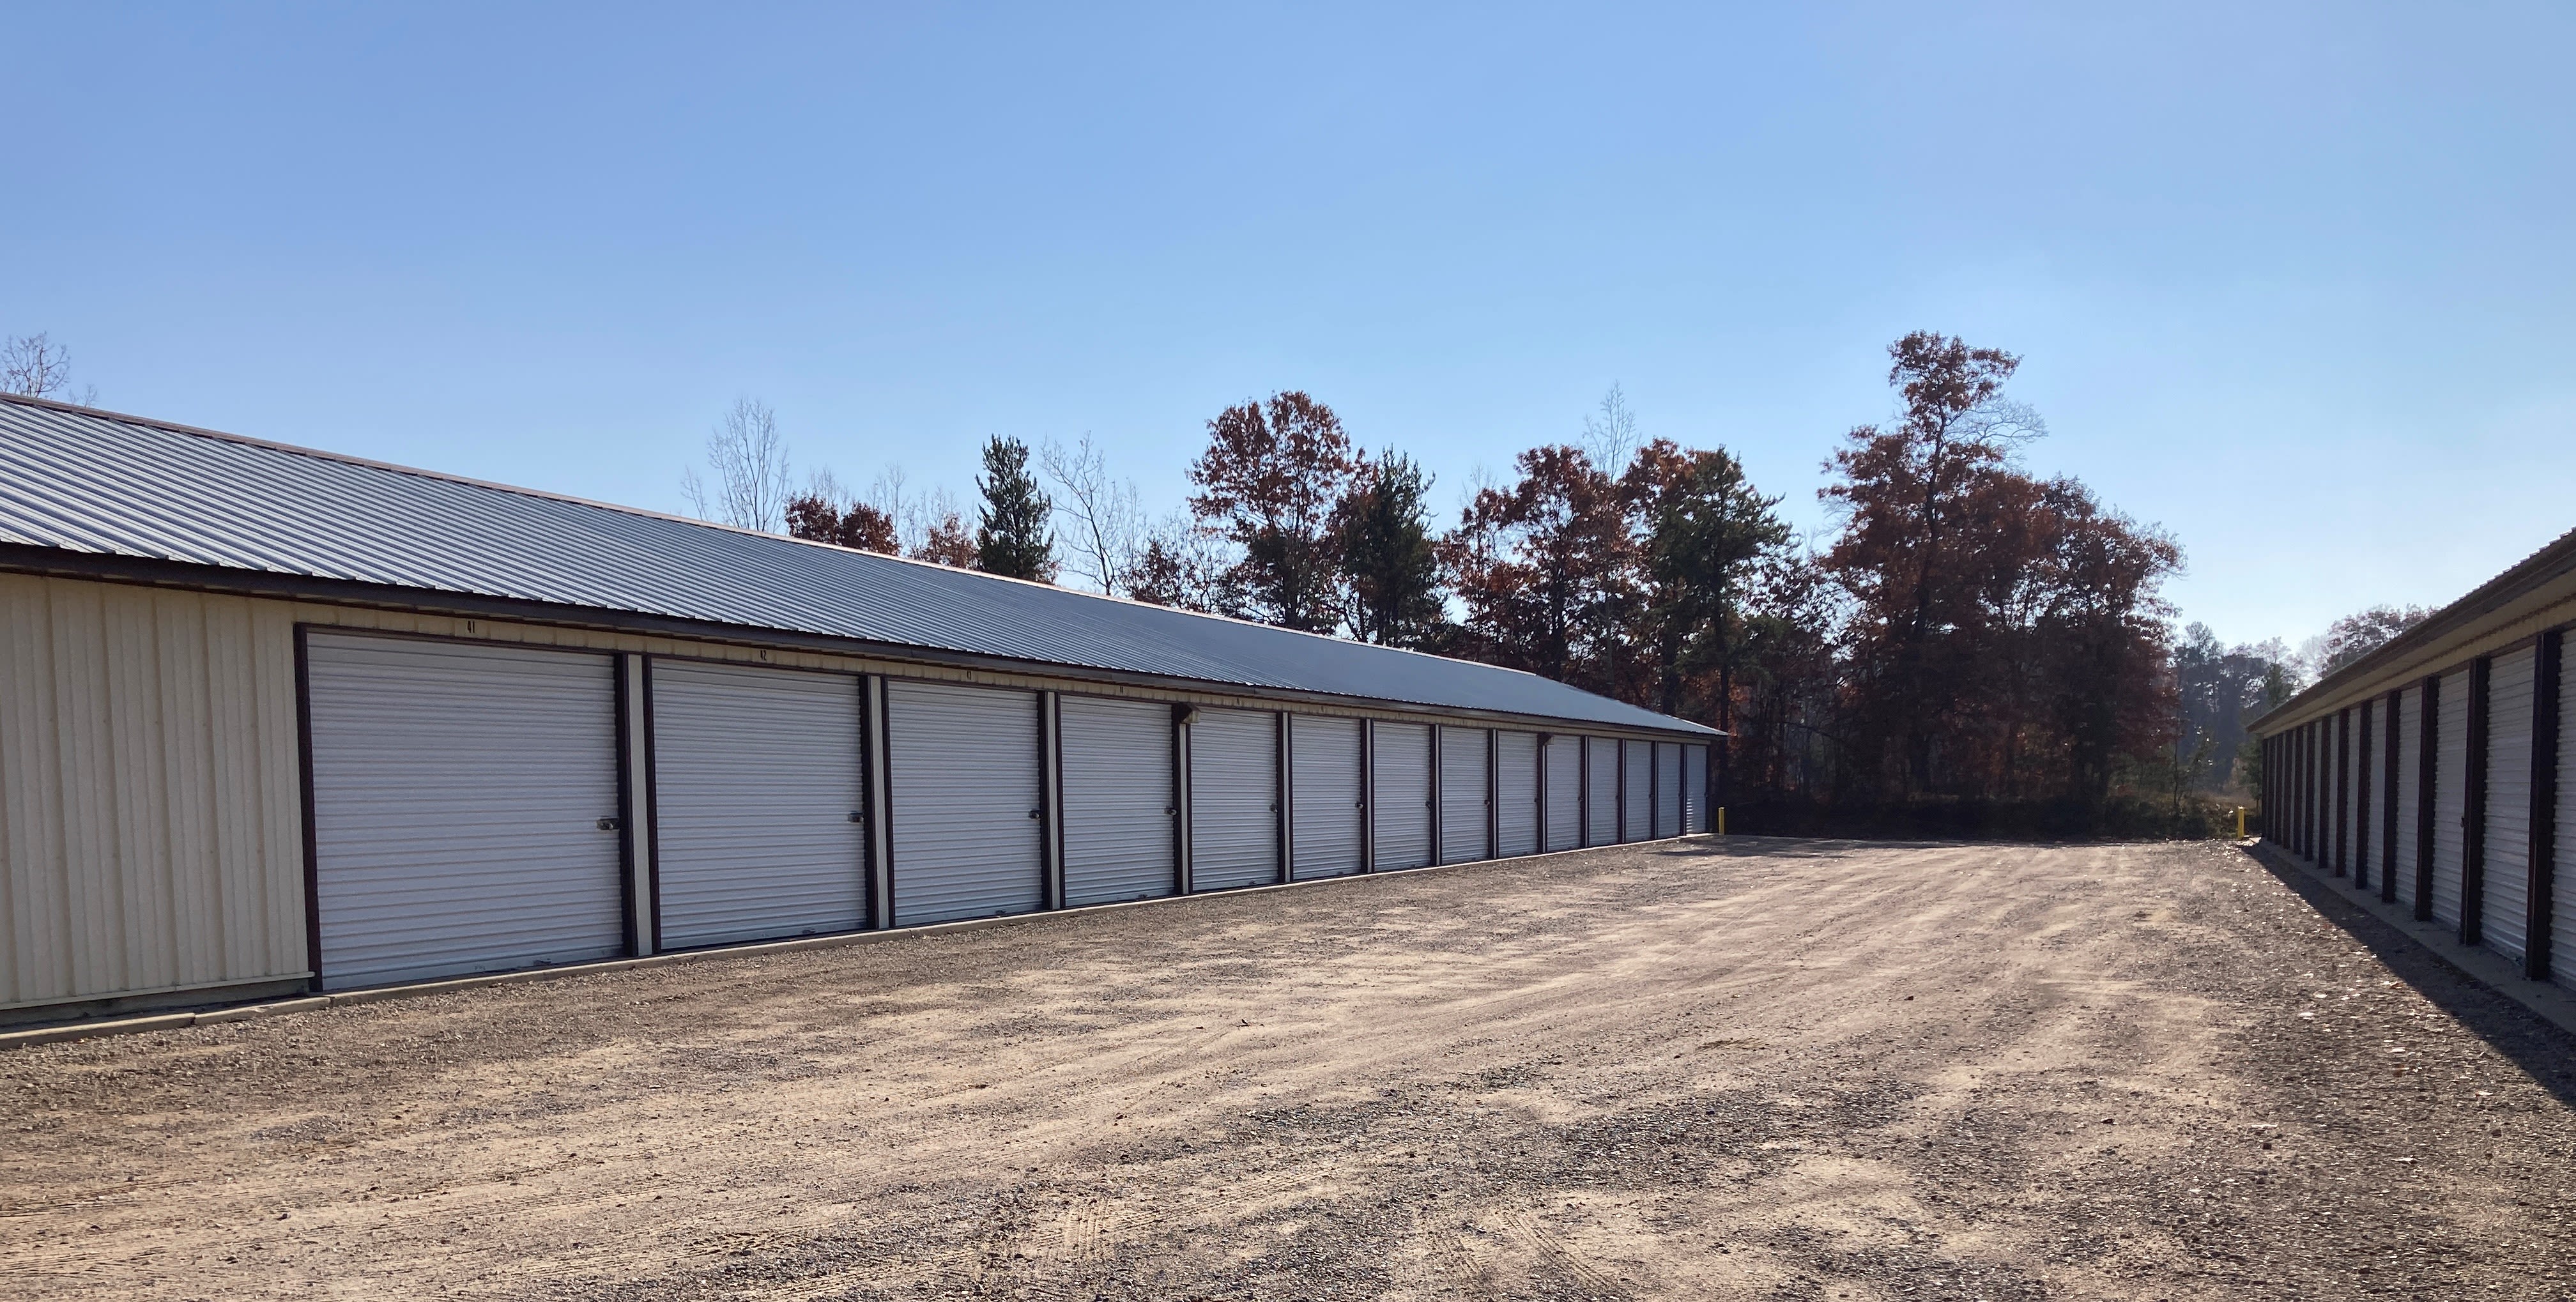 View our hours and directions at KO Storage in Baxter, Minnesota